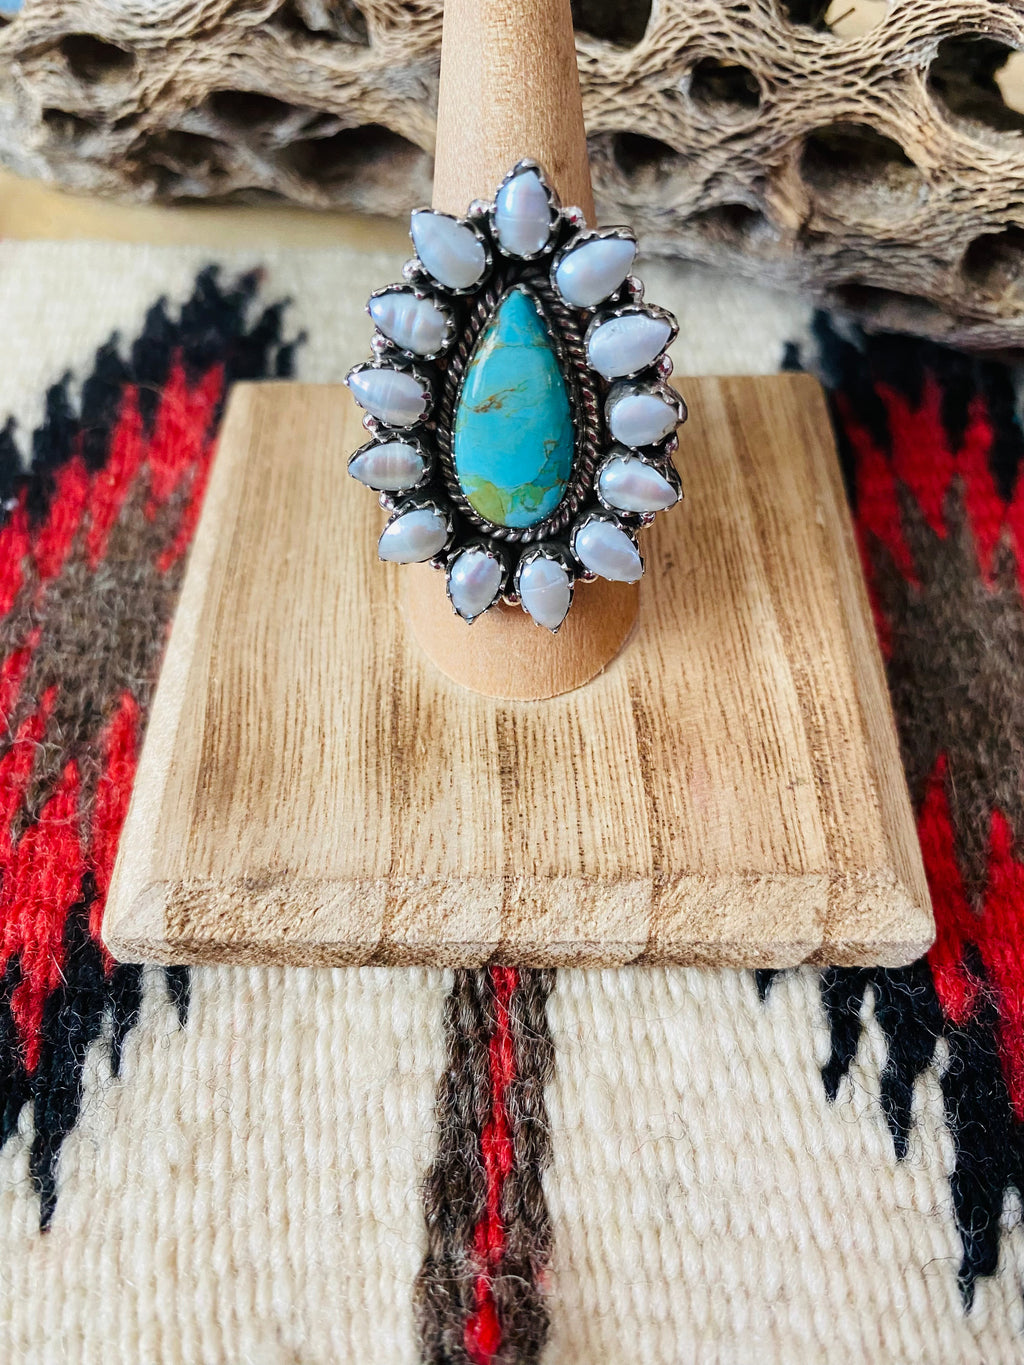 Handmade Sterling Silver, Turquoise & Pearl Cluster Adjustable Ring